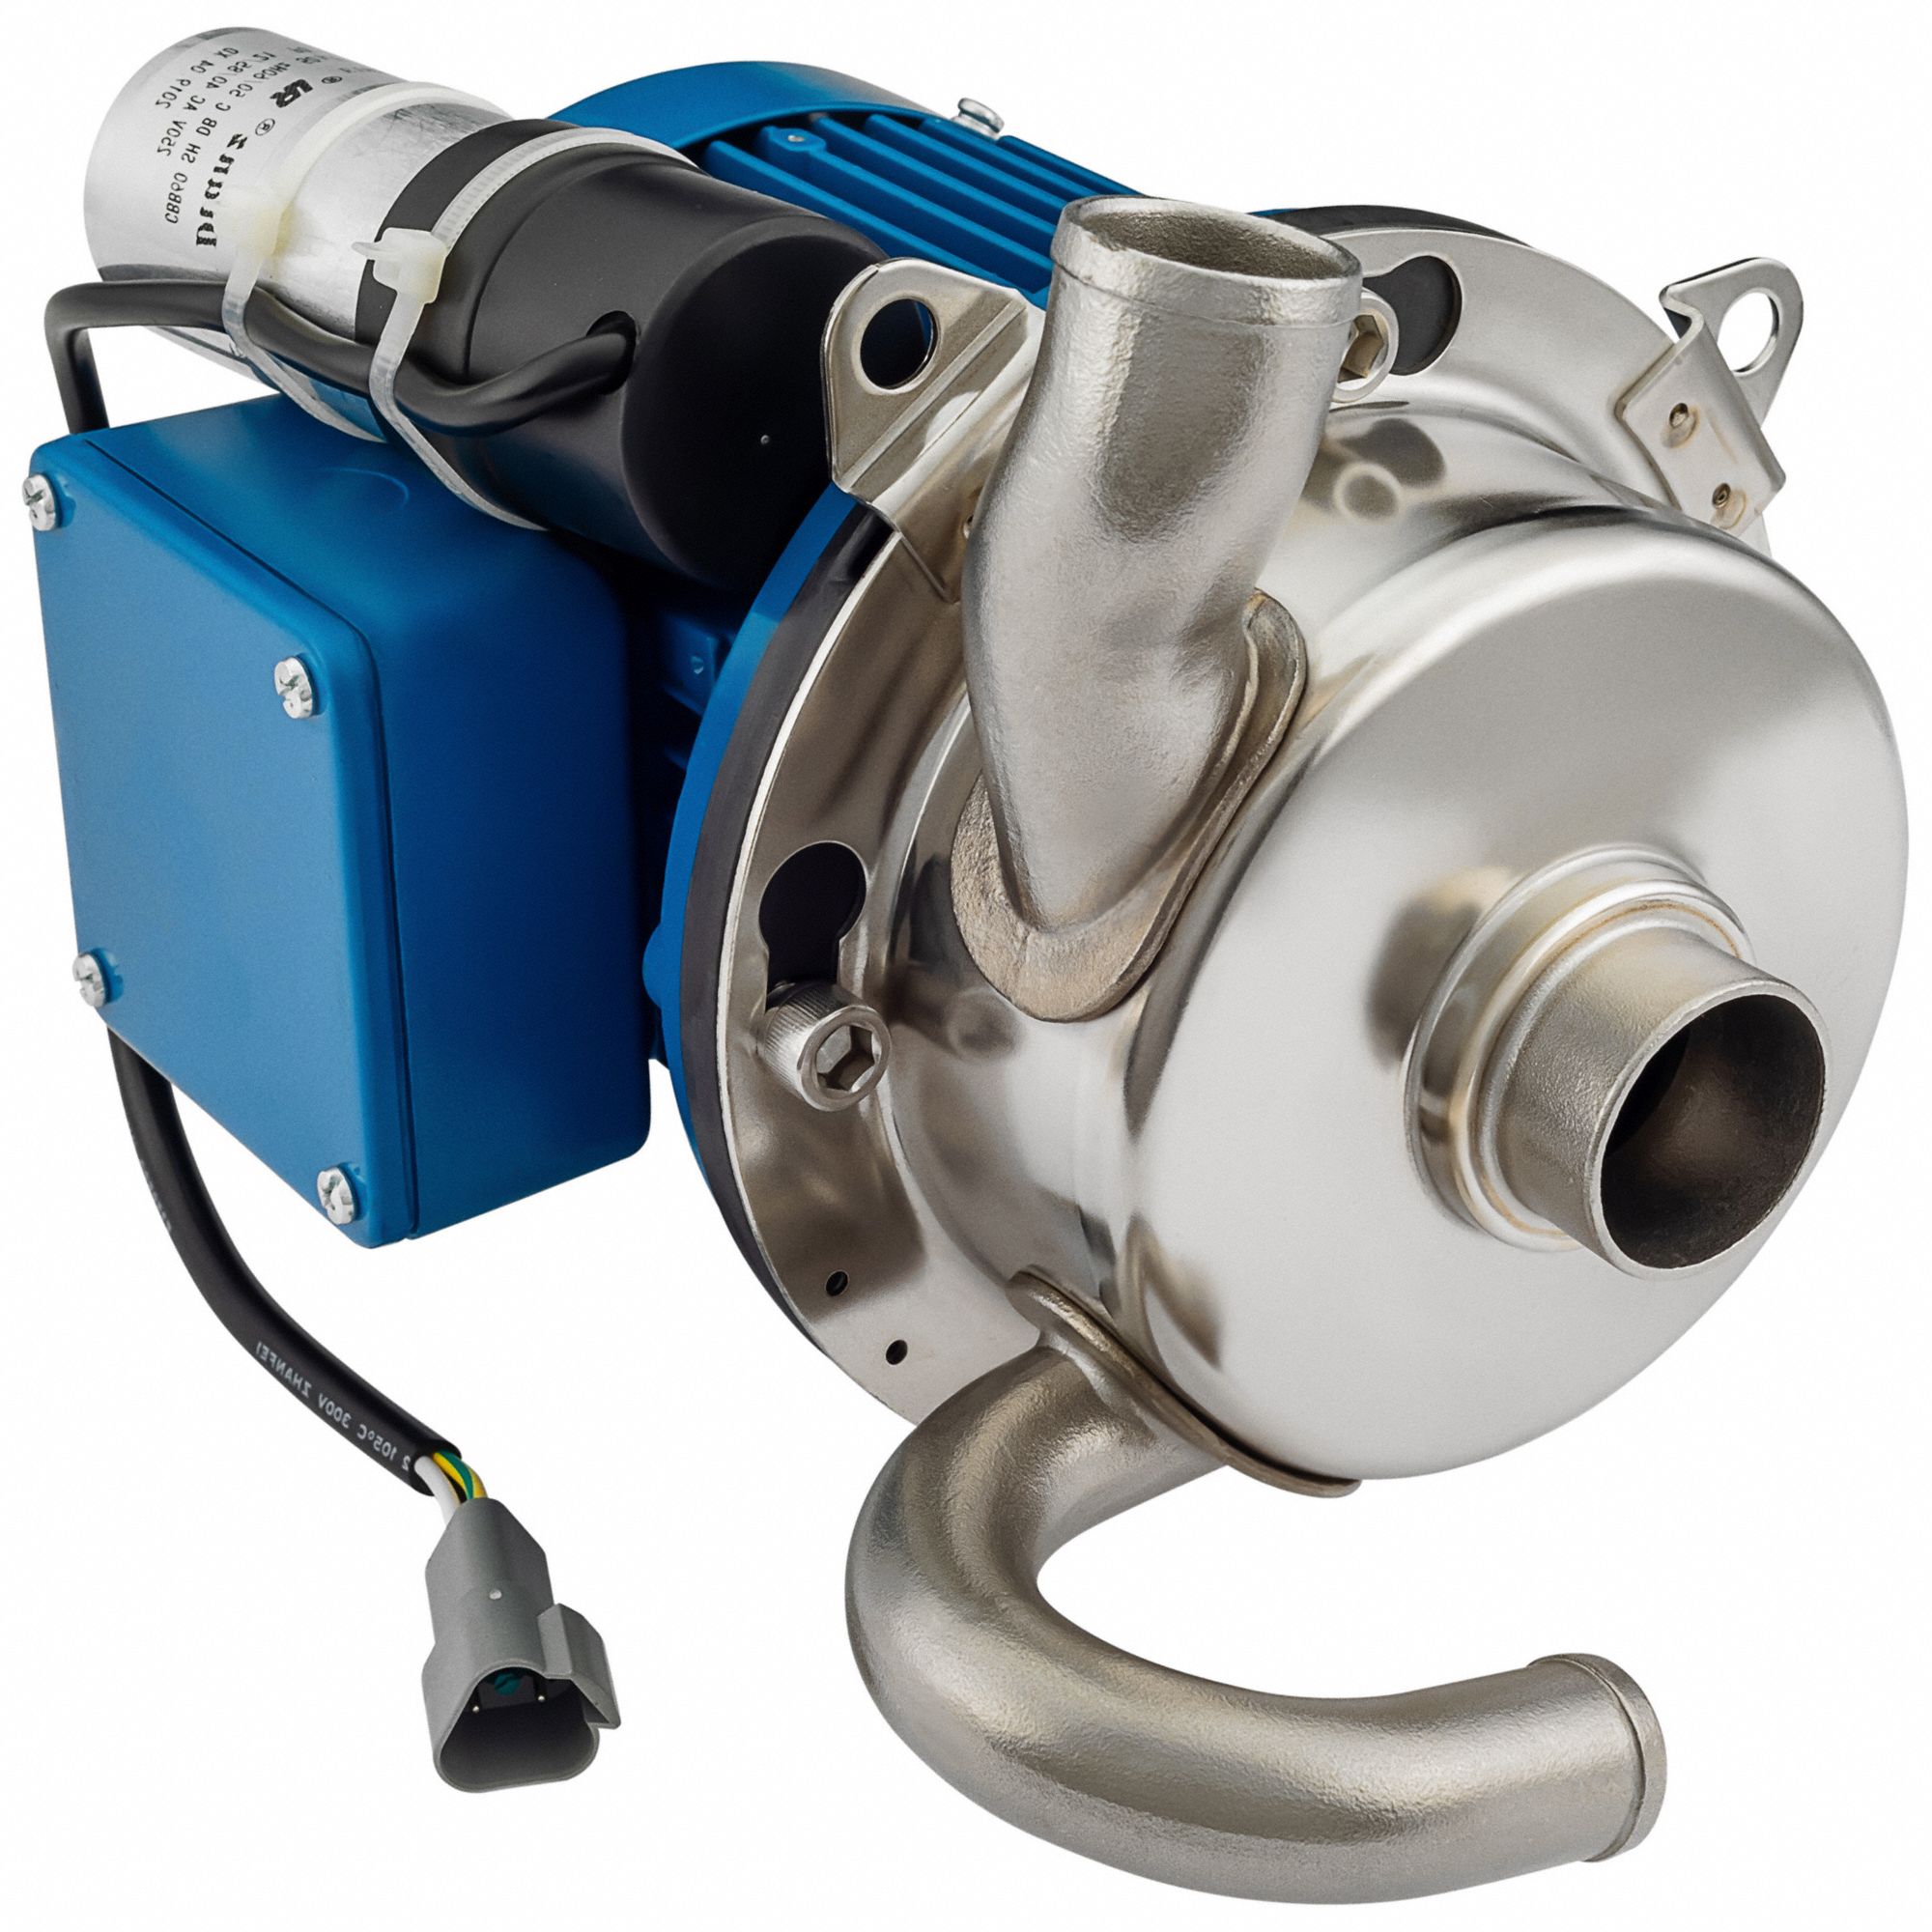 Centrifugal Pump: 1 hp, 115/230V AC, 64 ft Max Head, 1 1/2 in , 1 1/2 in Intake and Disch, TEFC, SS